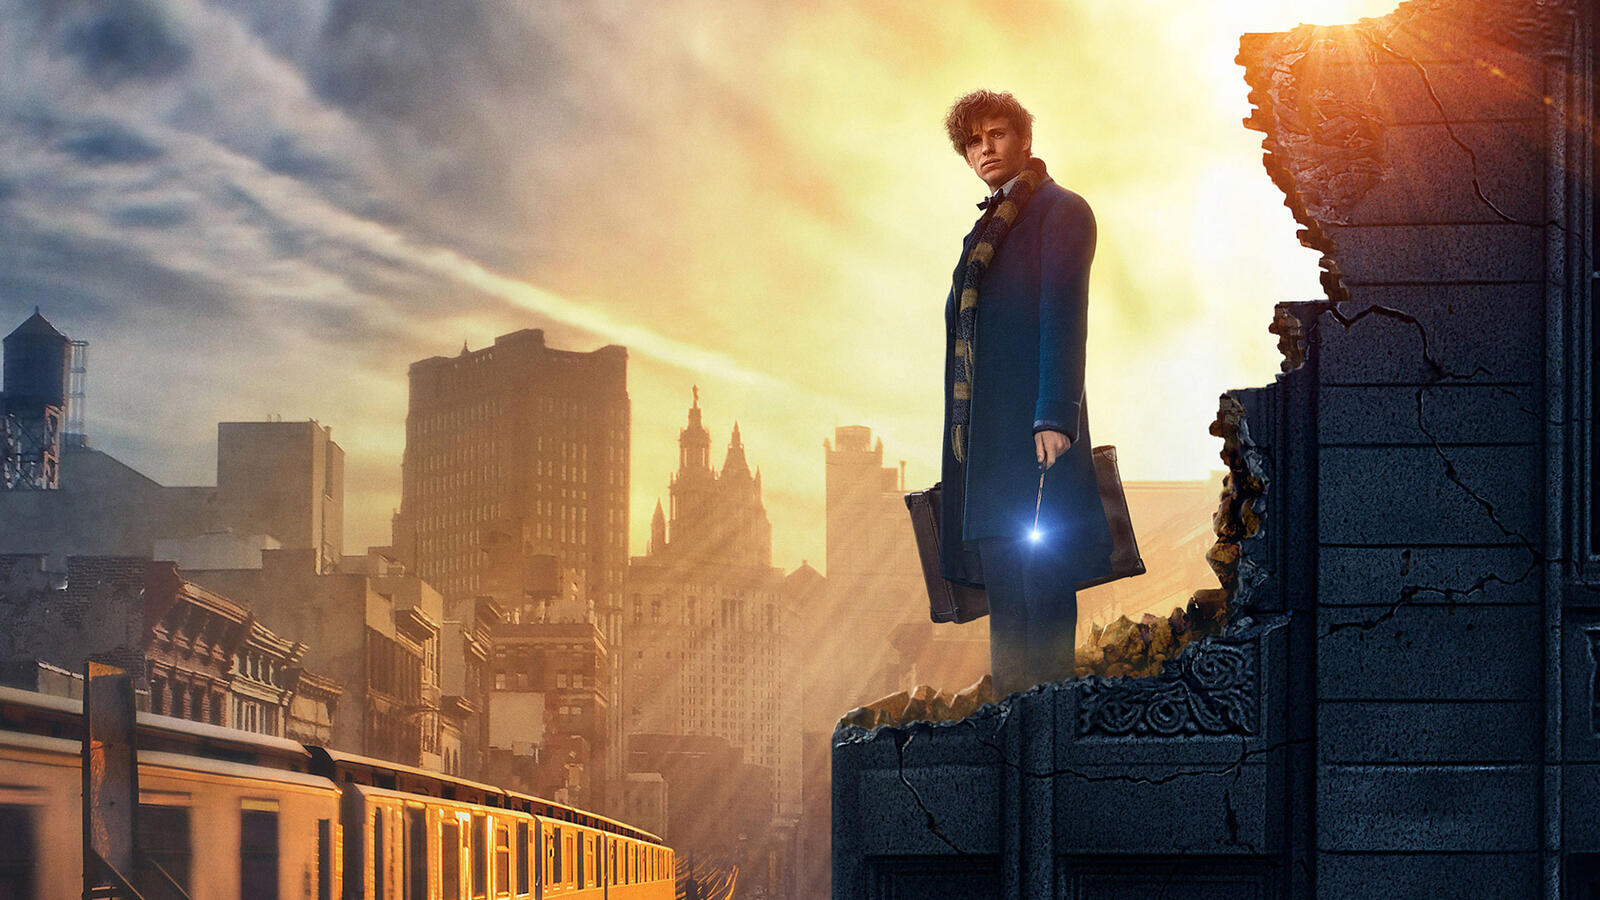 Wallpapers fantastic beasts and where to find them 2016 movies movies on the desktop